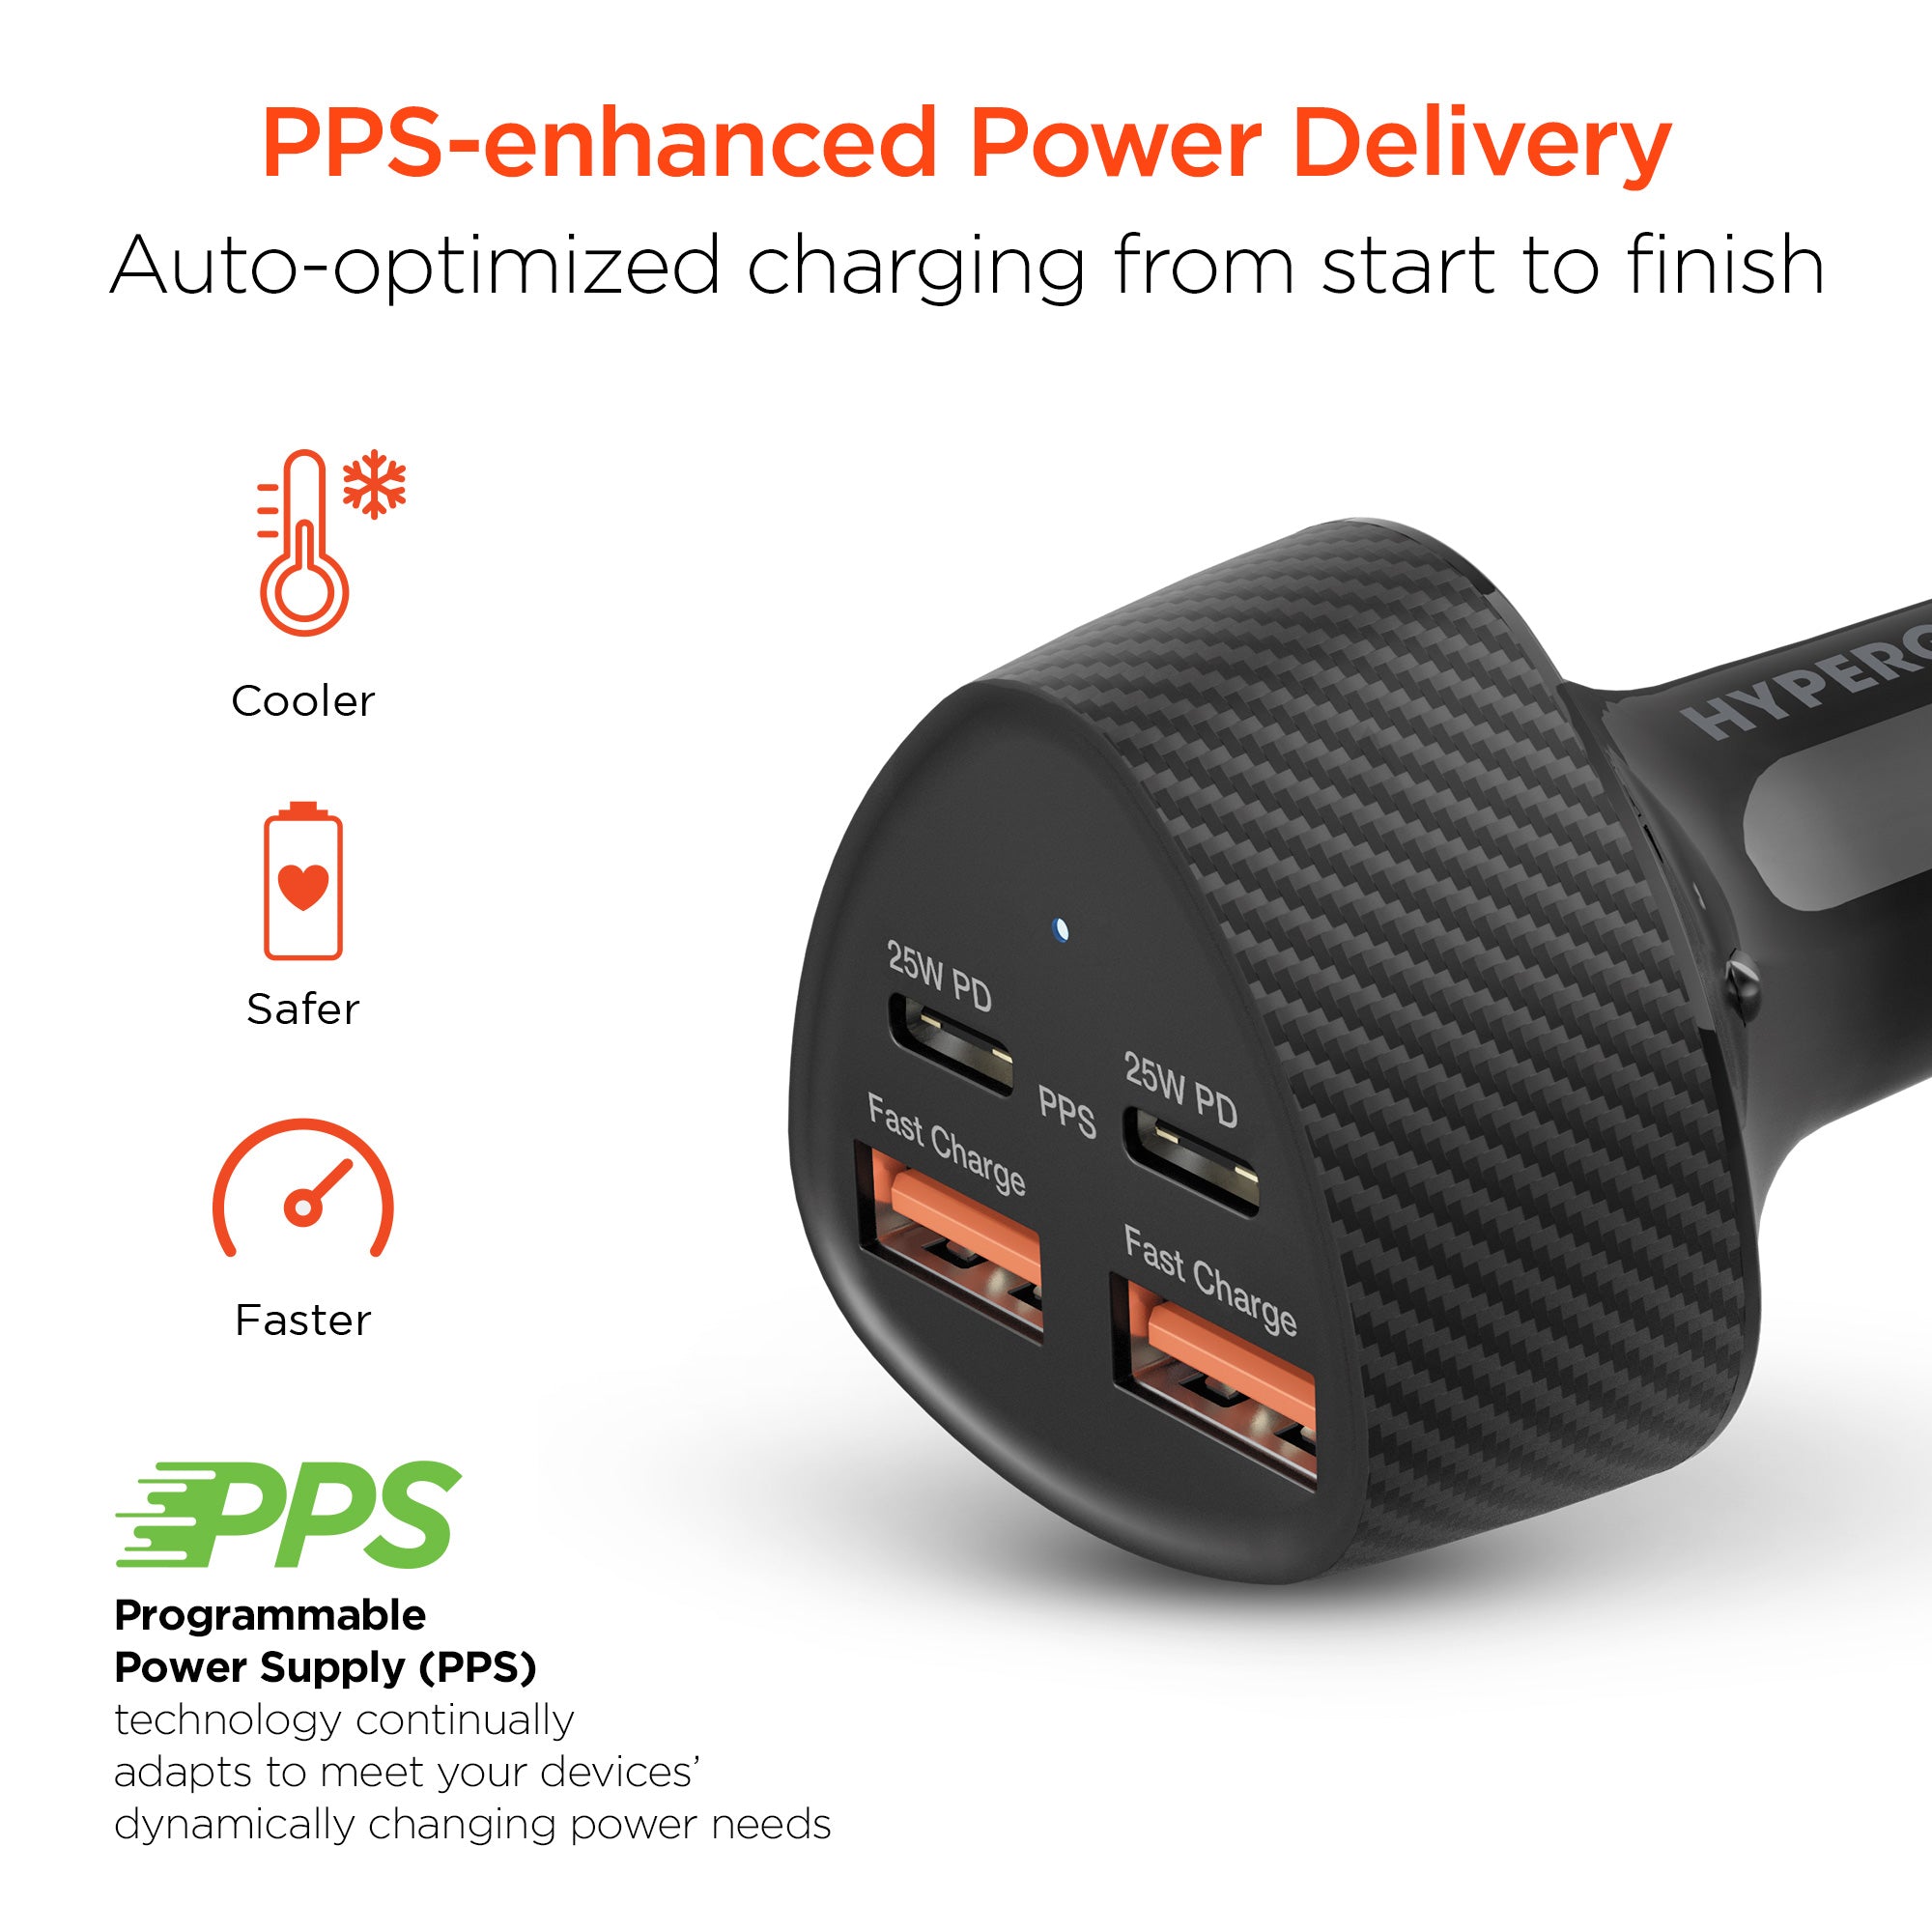 SpeedBoost 50W QUAD CAR CHARGER WITH DUAL 25W USB-C PD/PPS